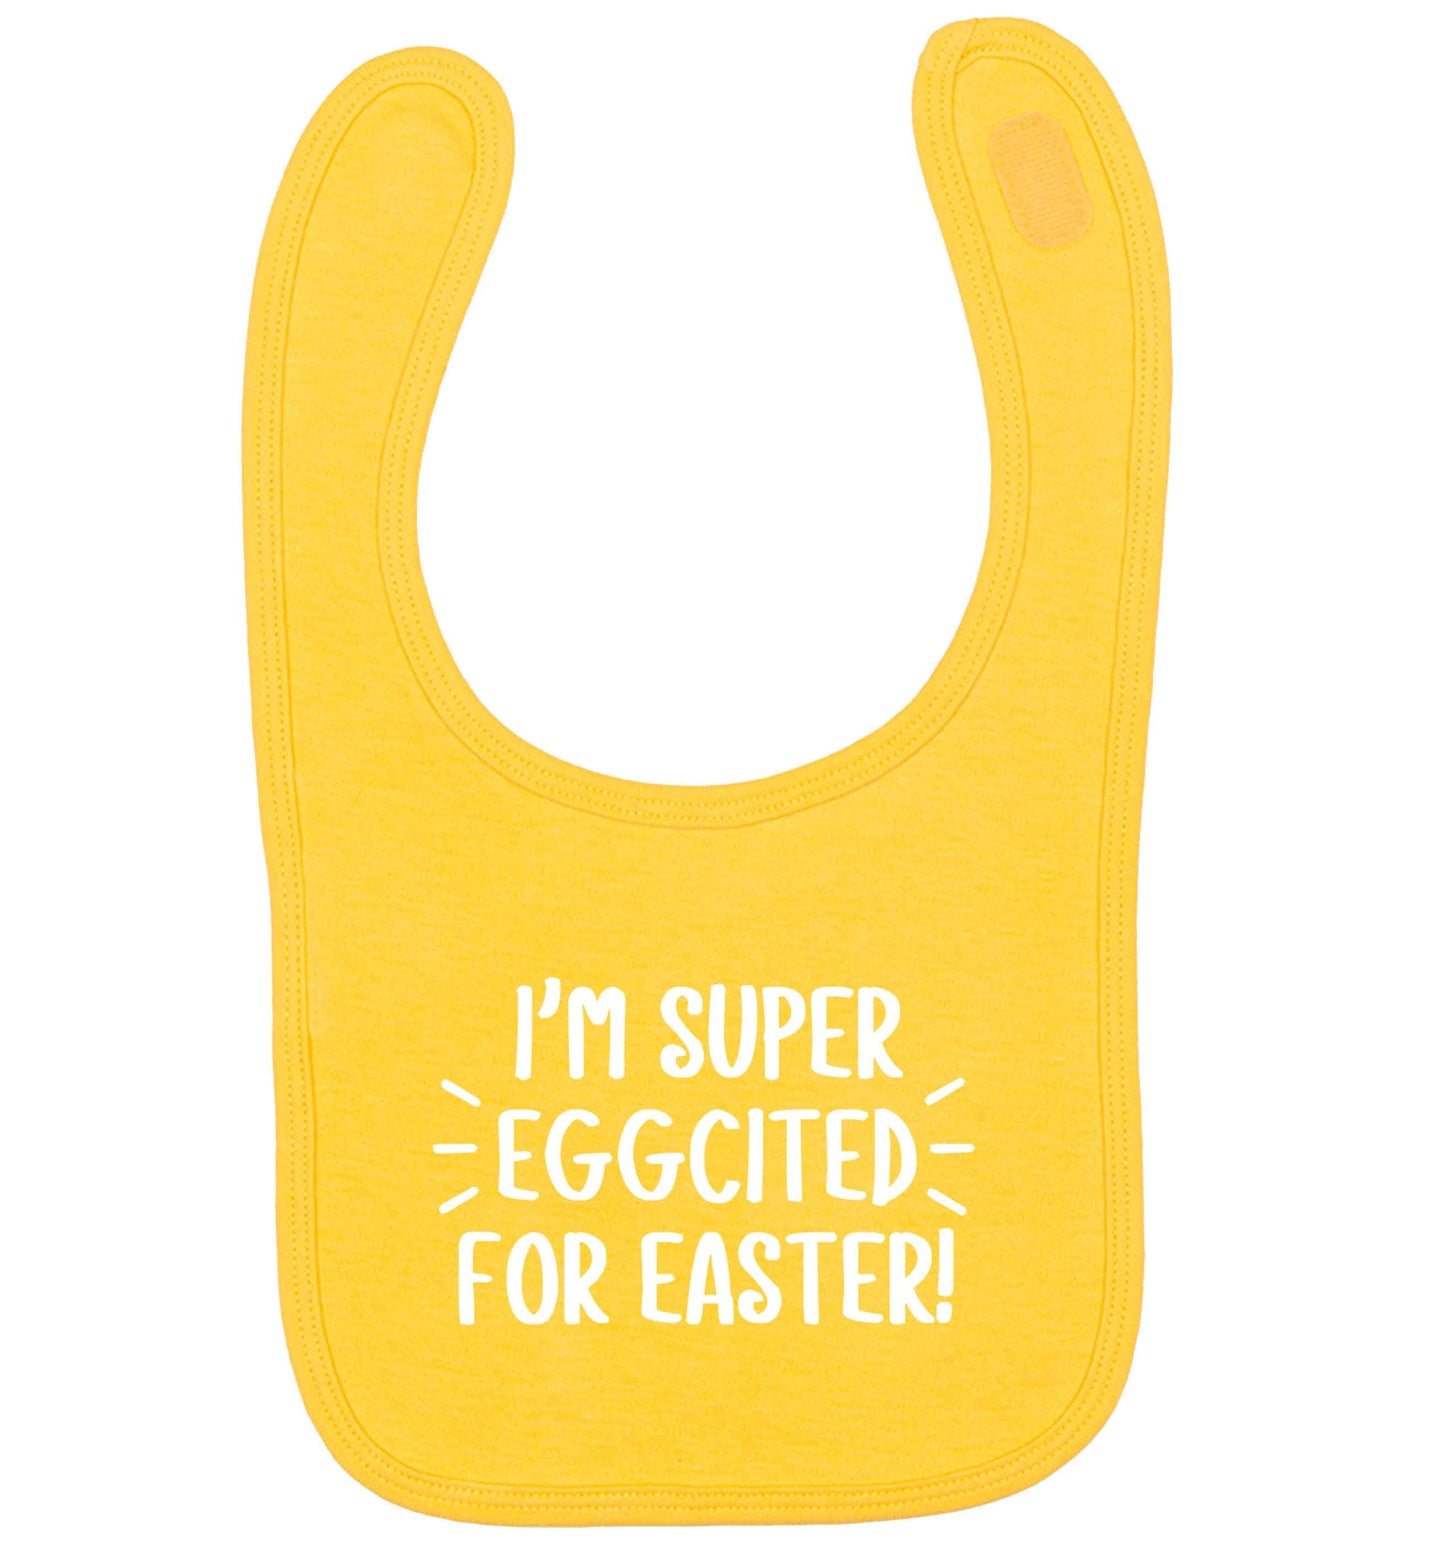 I'm super eggcited for Easter yellow baby bib